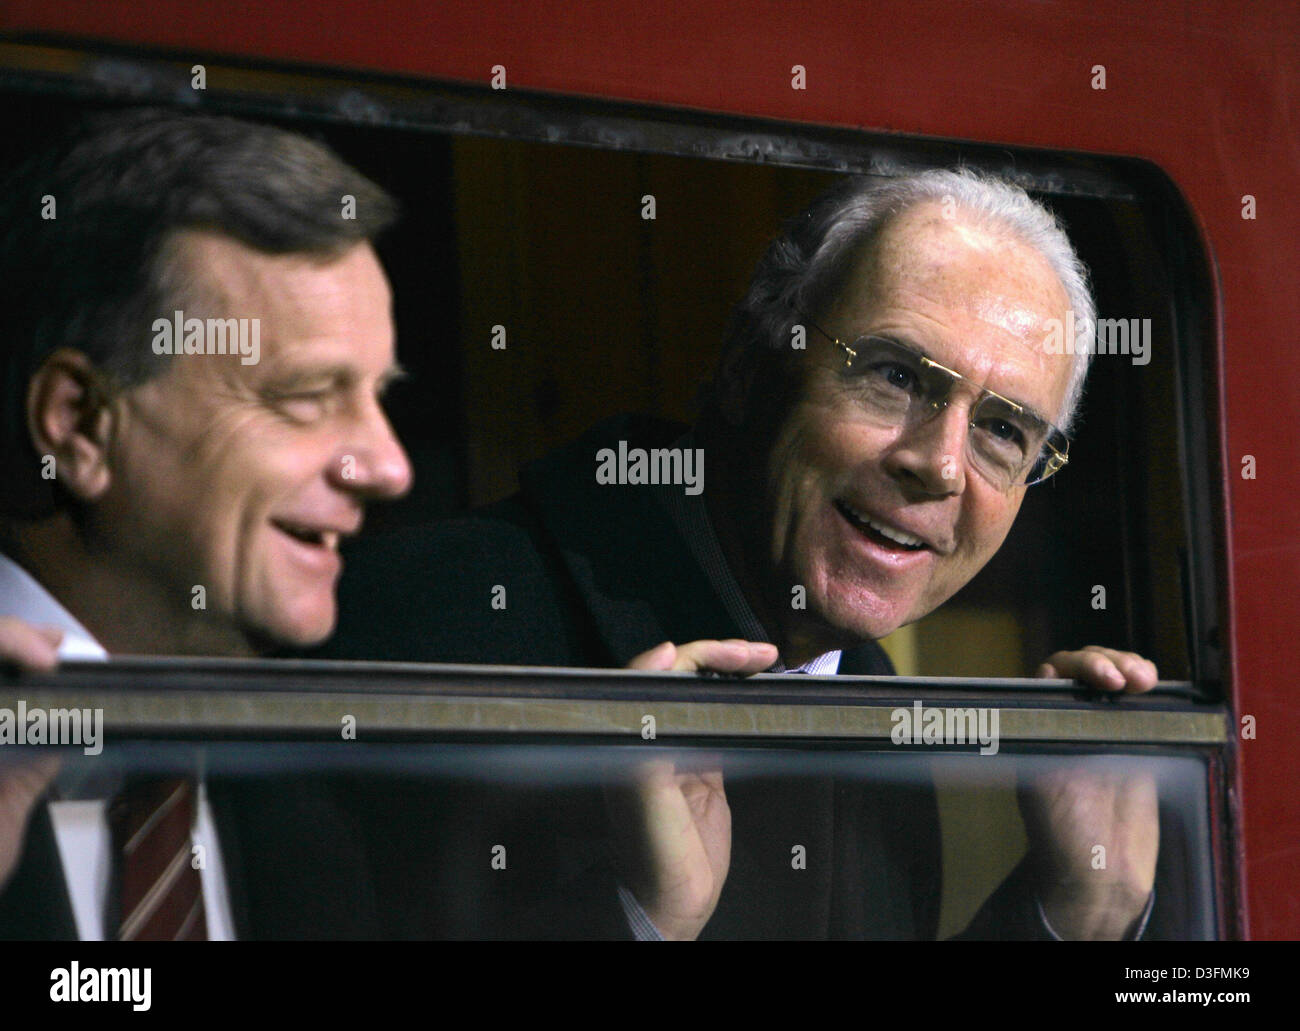 (dpa) - Hartmut Mehdorn (L), chairman of the Deutsche Bahn (DB, German railway), and Franz Beckenbauer, head of the 2006 FIFA World Cup Organizing Committee, look out of a window of the original train with which the first German World Cup winners in 1954 toured the country in Berlin, Germany, 7 December 2004. The Deutsche Bahn has been selected as the final national sponsor for the Stock Photo